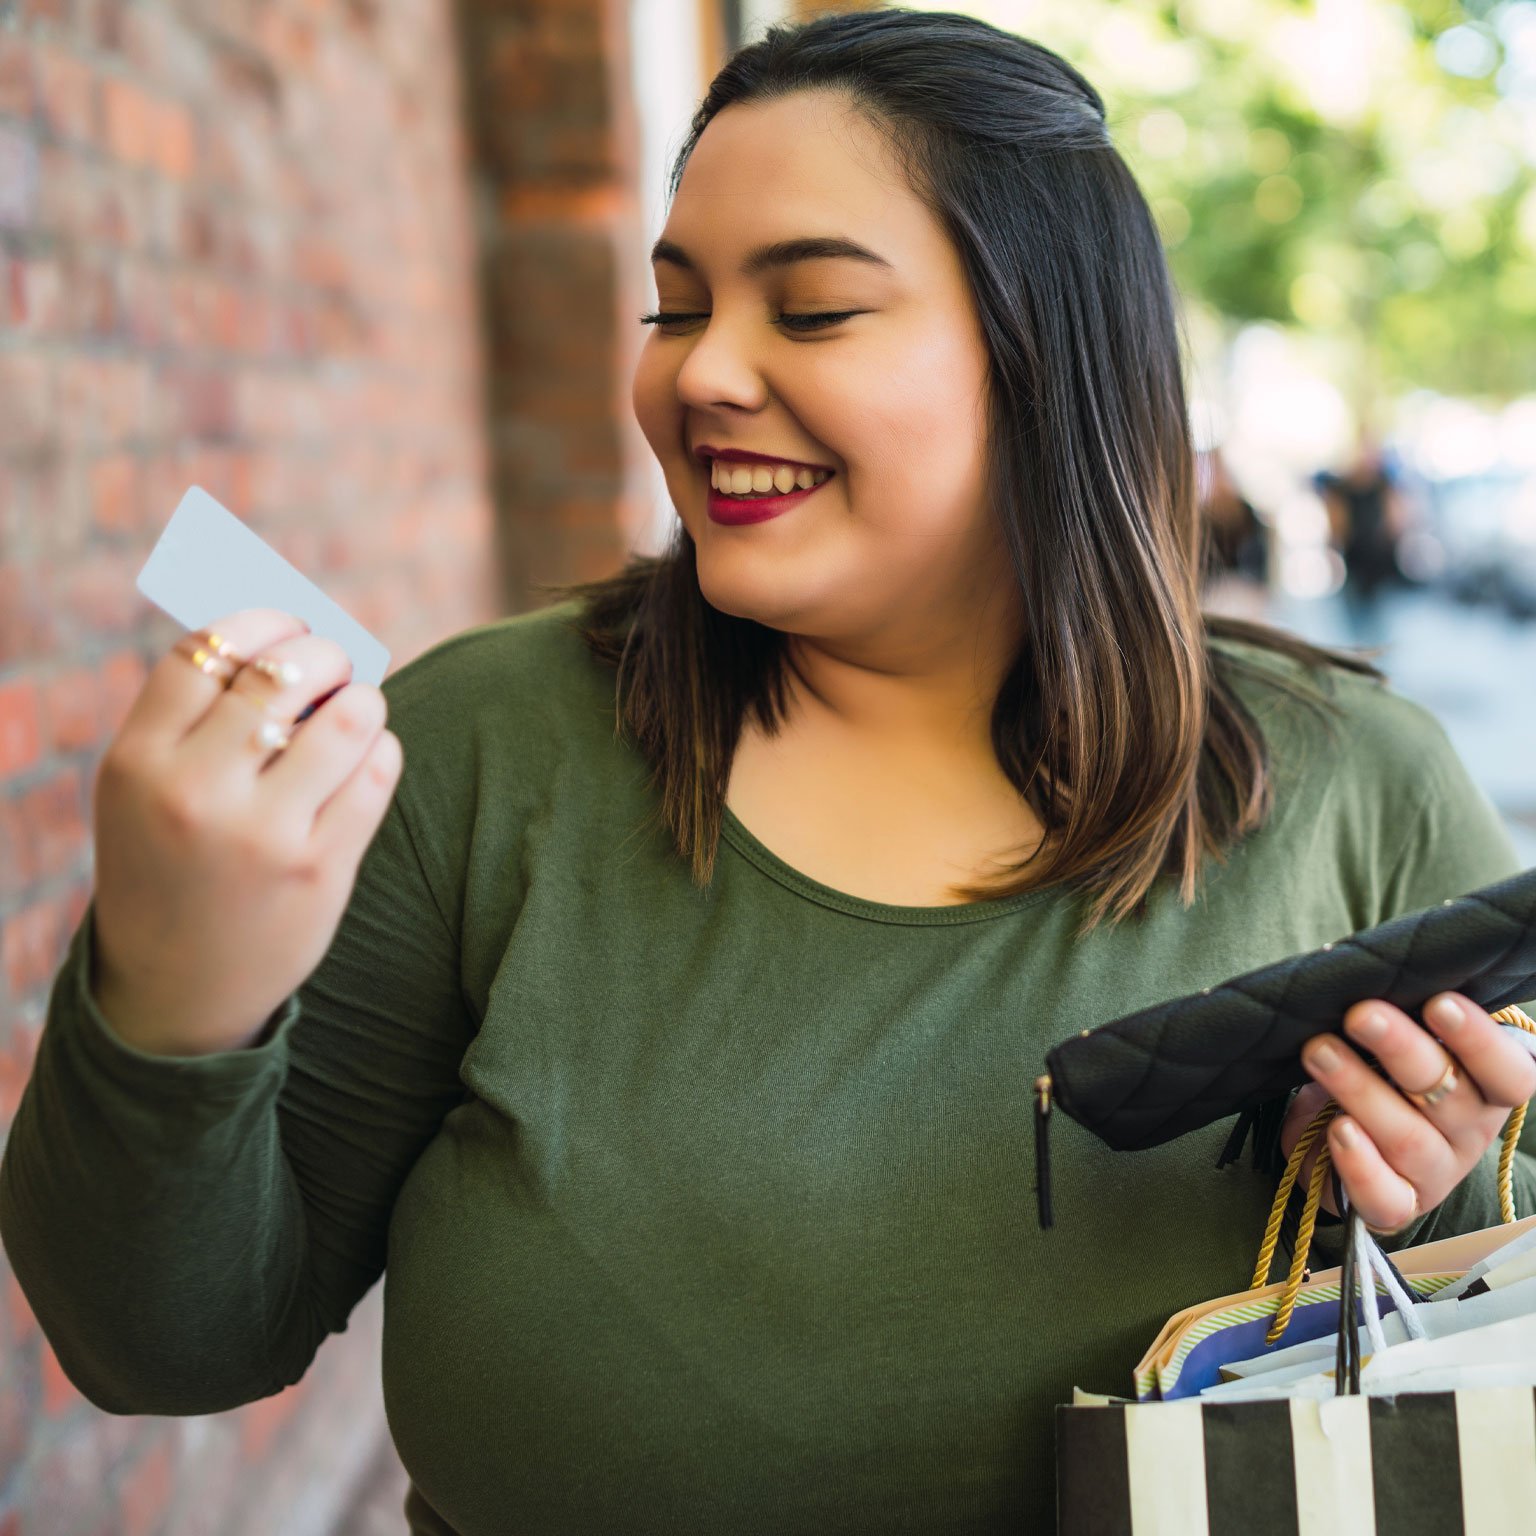 Woman-smiling-holding-her-debit-card-that-earns-her-rewards-and-cash-back.